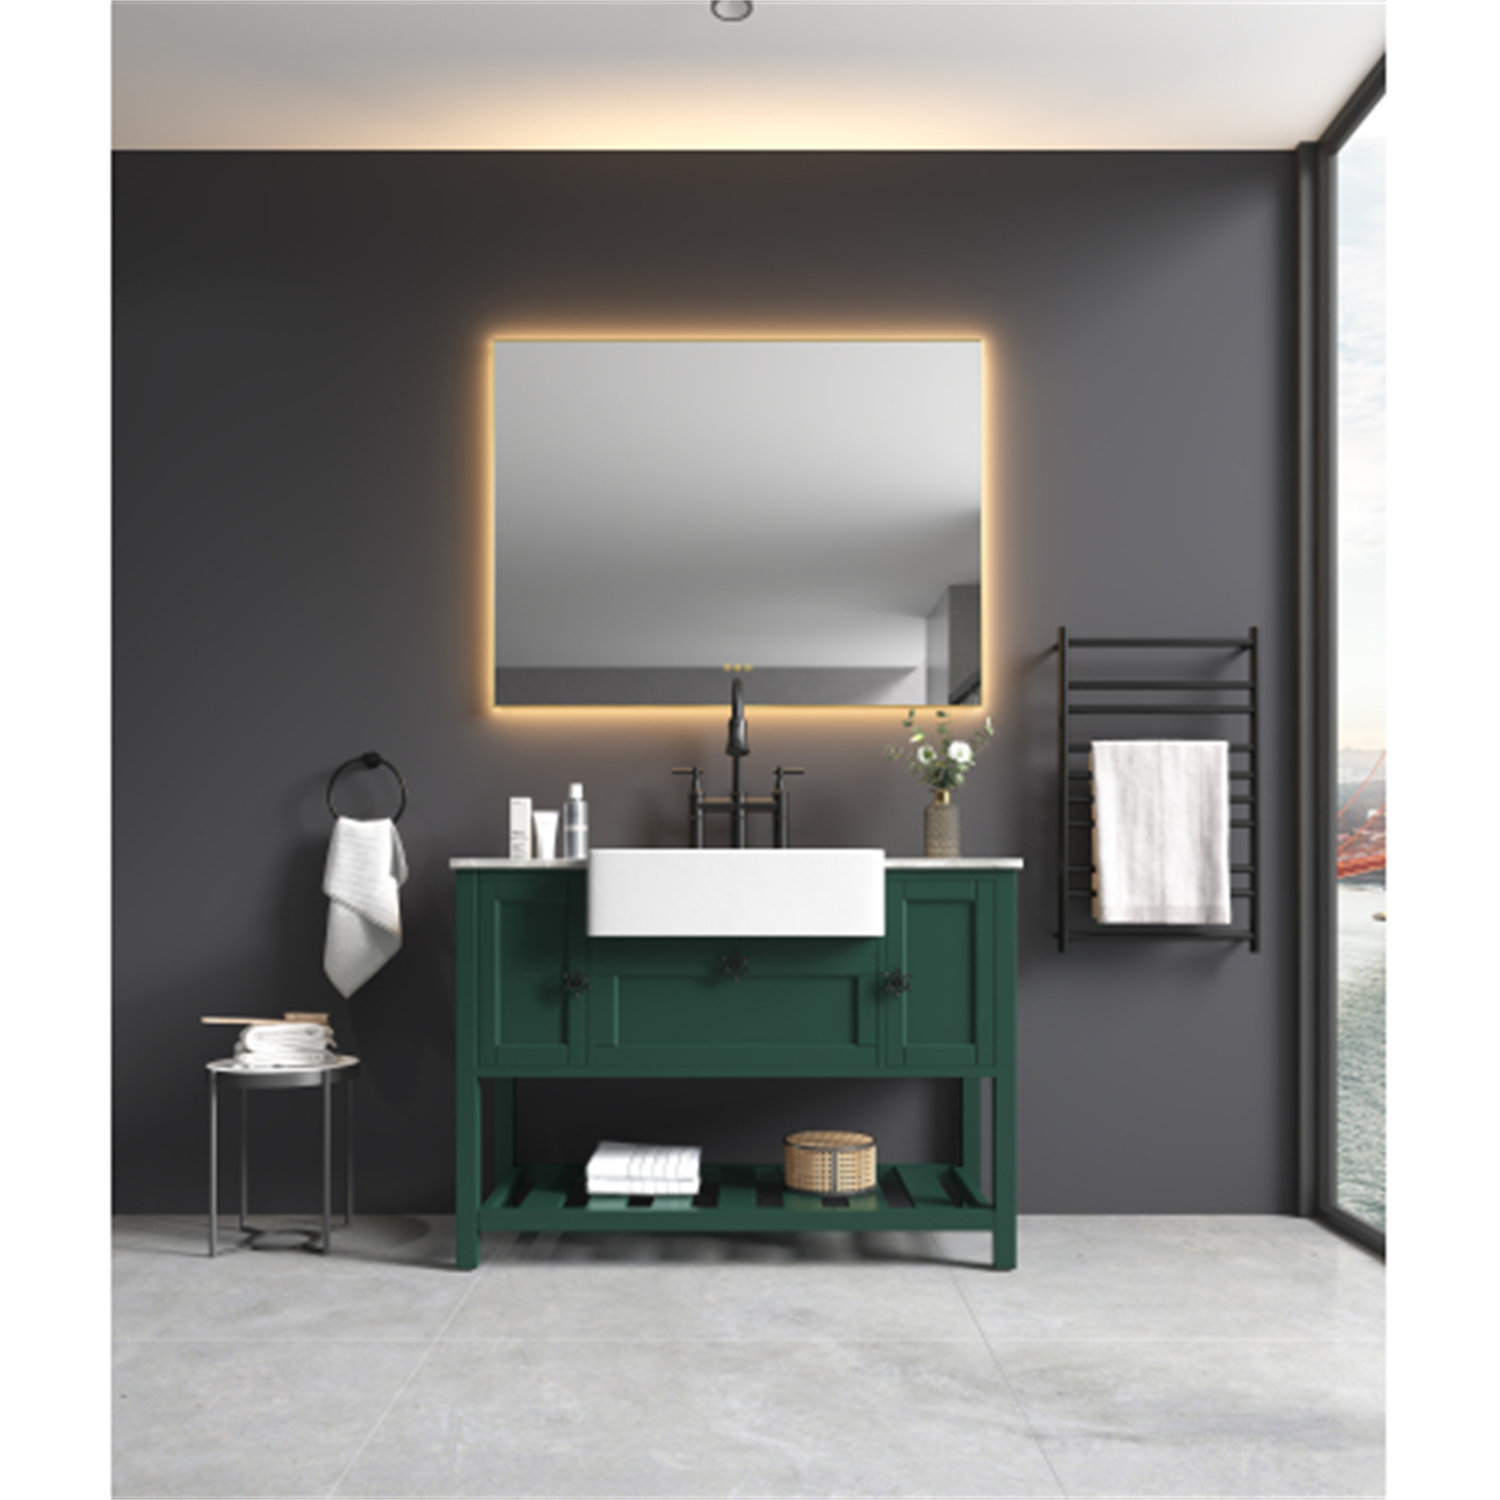 48x36 Inch LED Mirror Bathroom Vanity Mirrors with Lights, Wall Mounted Anti-Fog Memory Large Dimmable Front Light Makeup Mirror